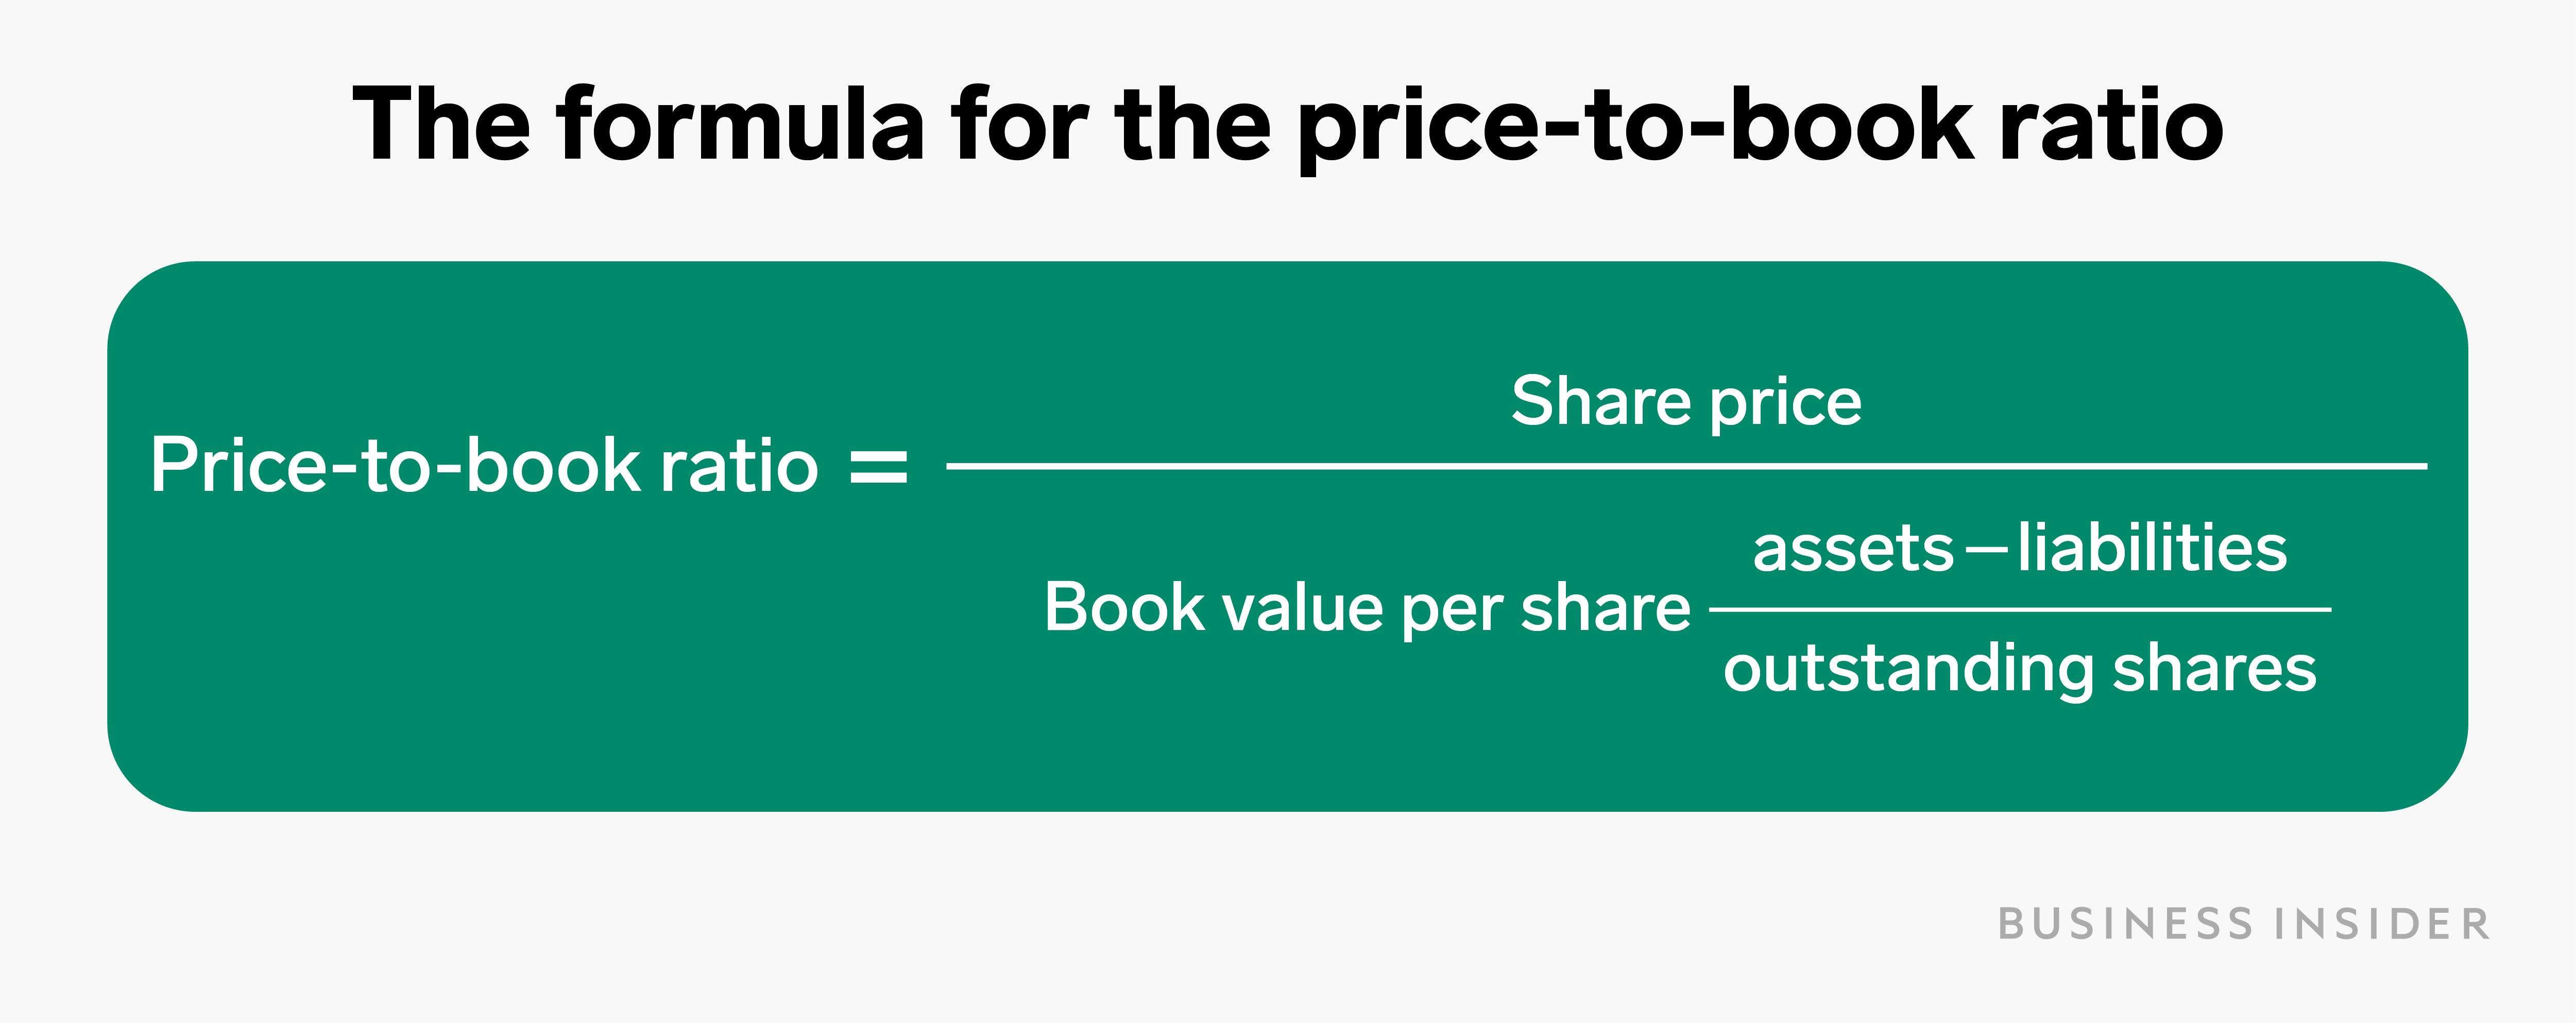 The pricetobook ratio is a way to determine if a company